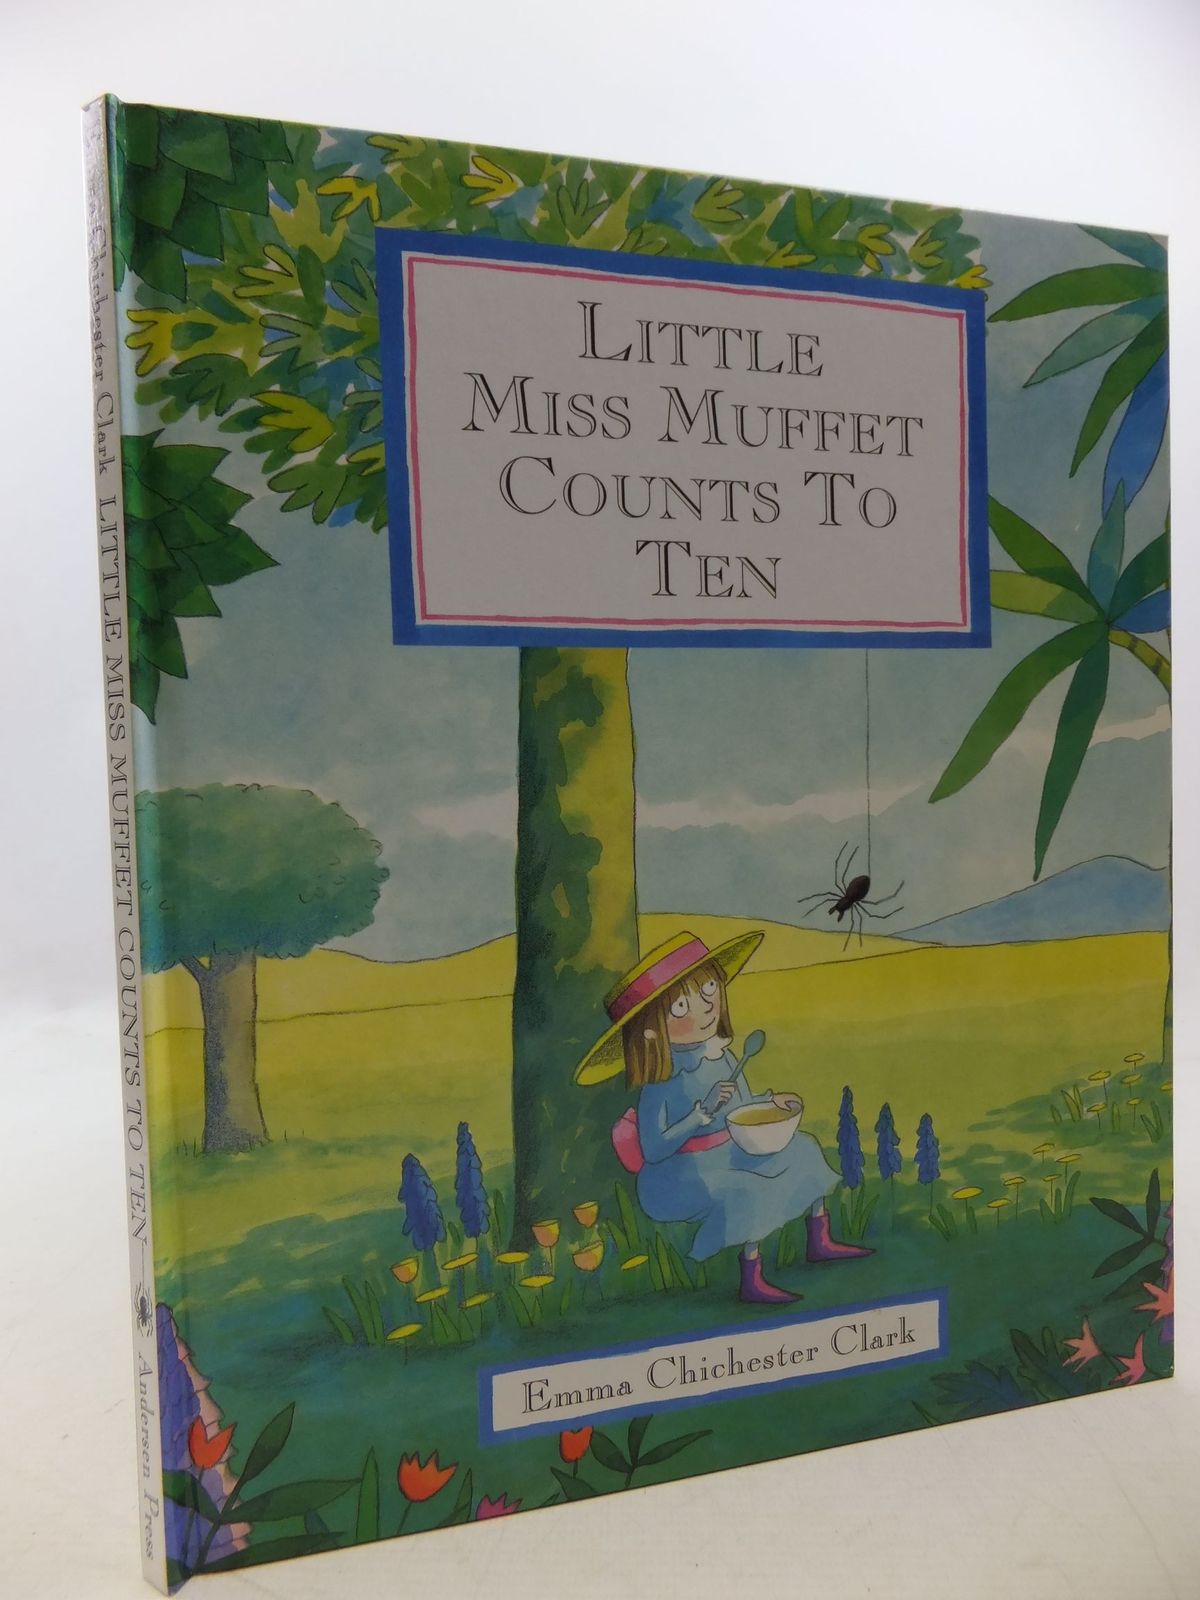 Photo of LITTLE MISS MUFFET COUNTS TO TEN written by Chichester-Clarke, Emma illustrated by Clark, Emma Chichester published by Andersen Press (STOCK CODE: 1710270)  for sale by Stella & Rose's Books